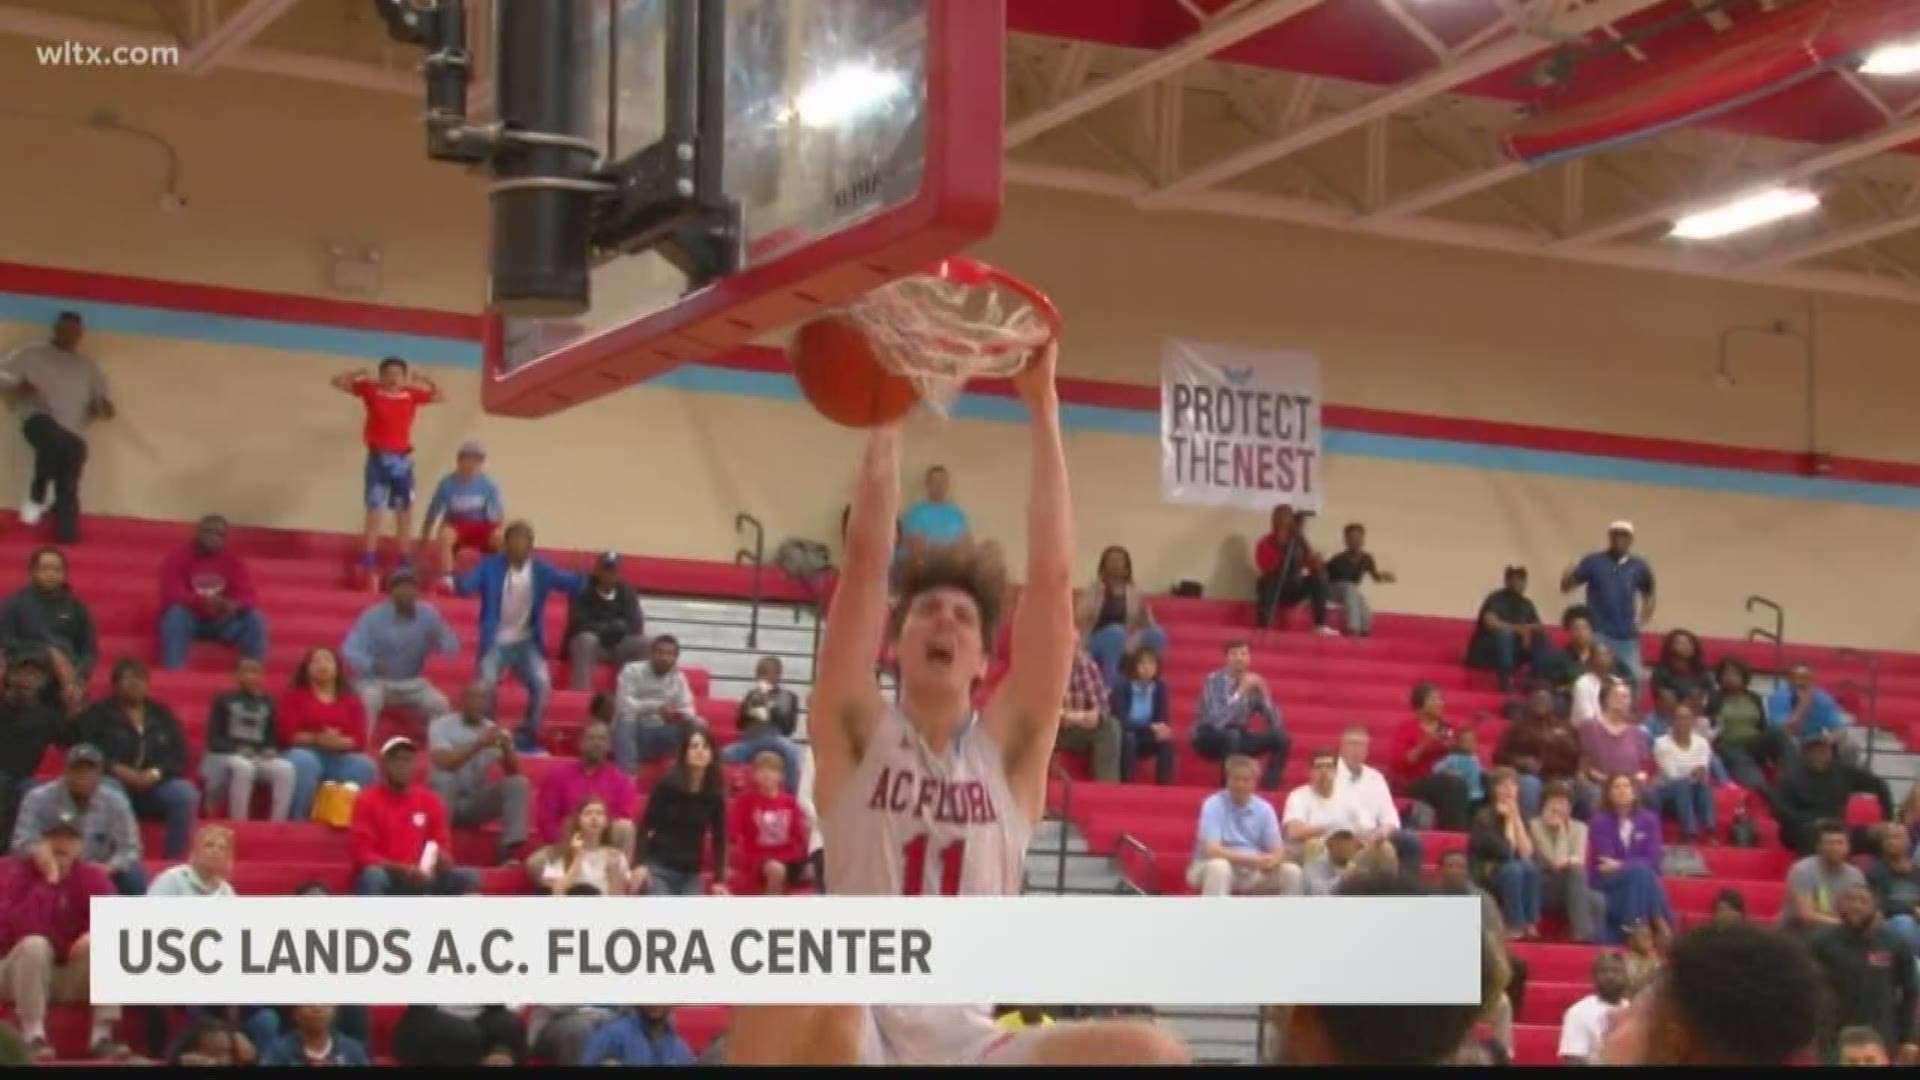 South Carolina head basketball coach Frank Martin received a commitment Tuesday from an A.C. Flora big man who could play power forward or center at the next level.